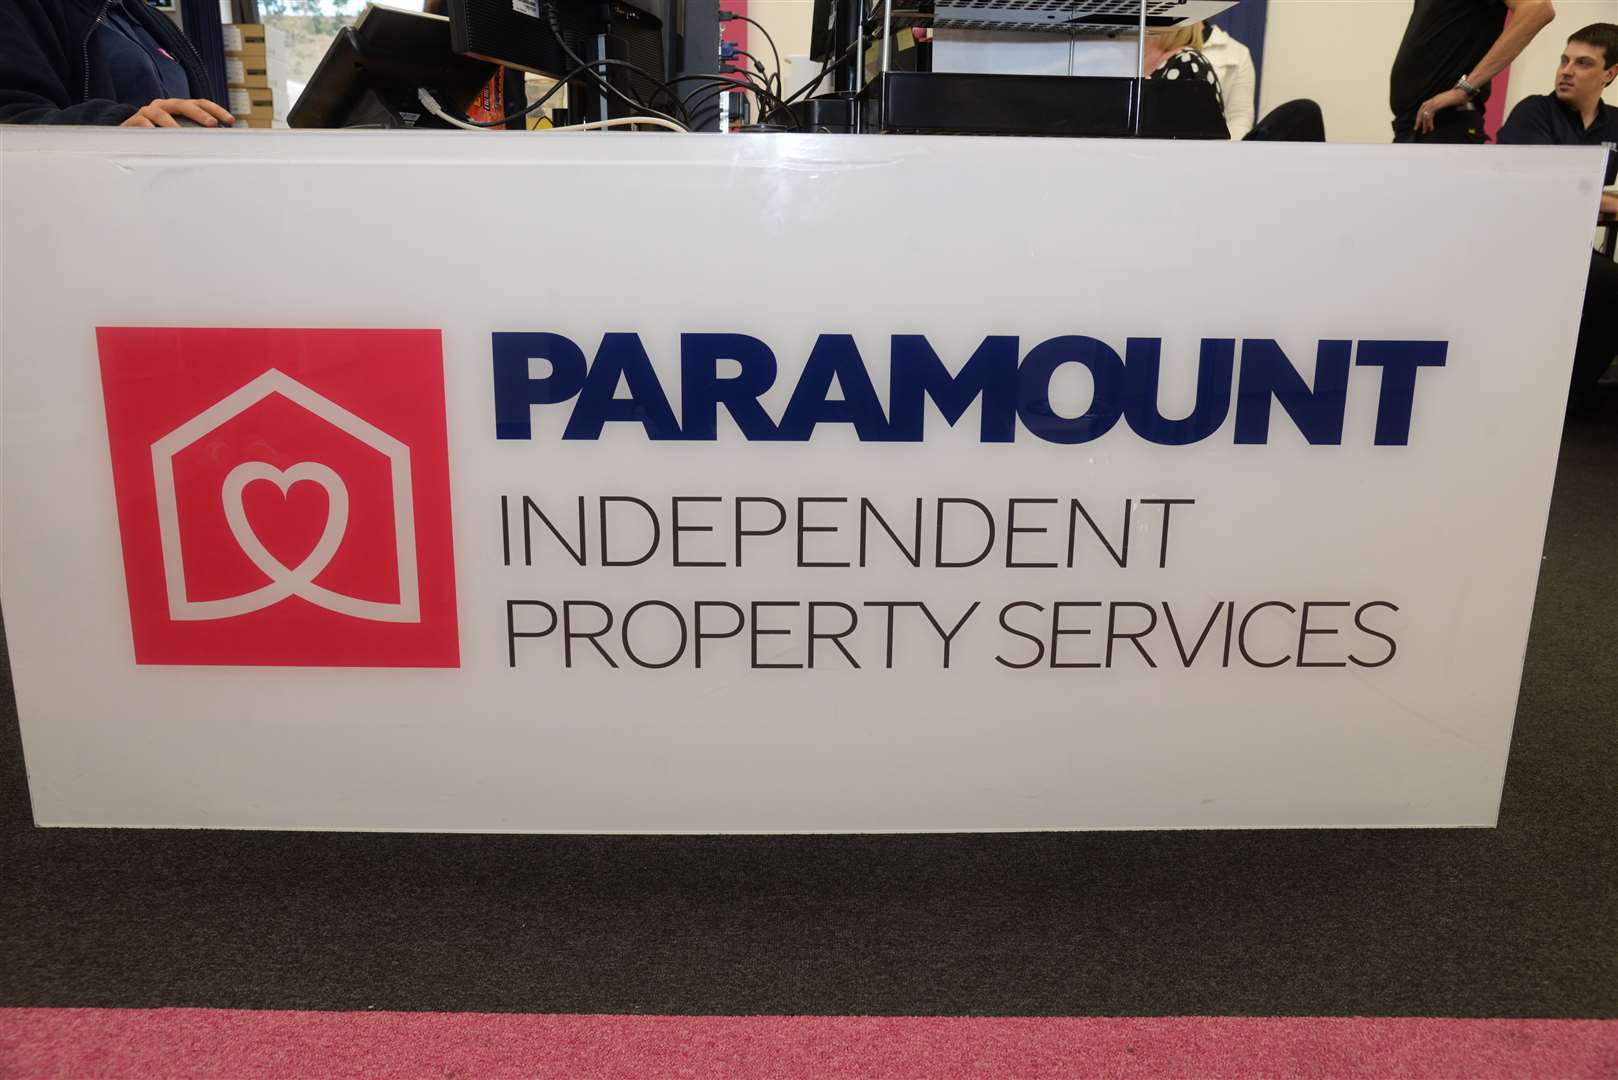 Paramount Independent Property Services are based Affinity House, Thomas Longley Road, Rochester